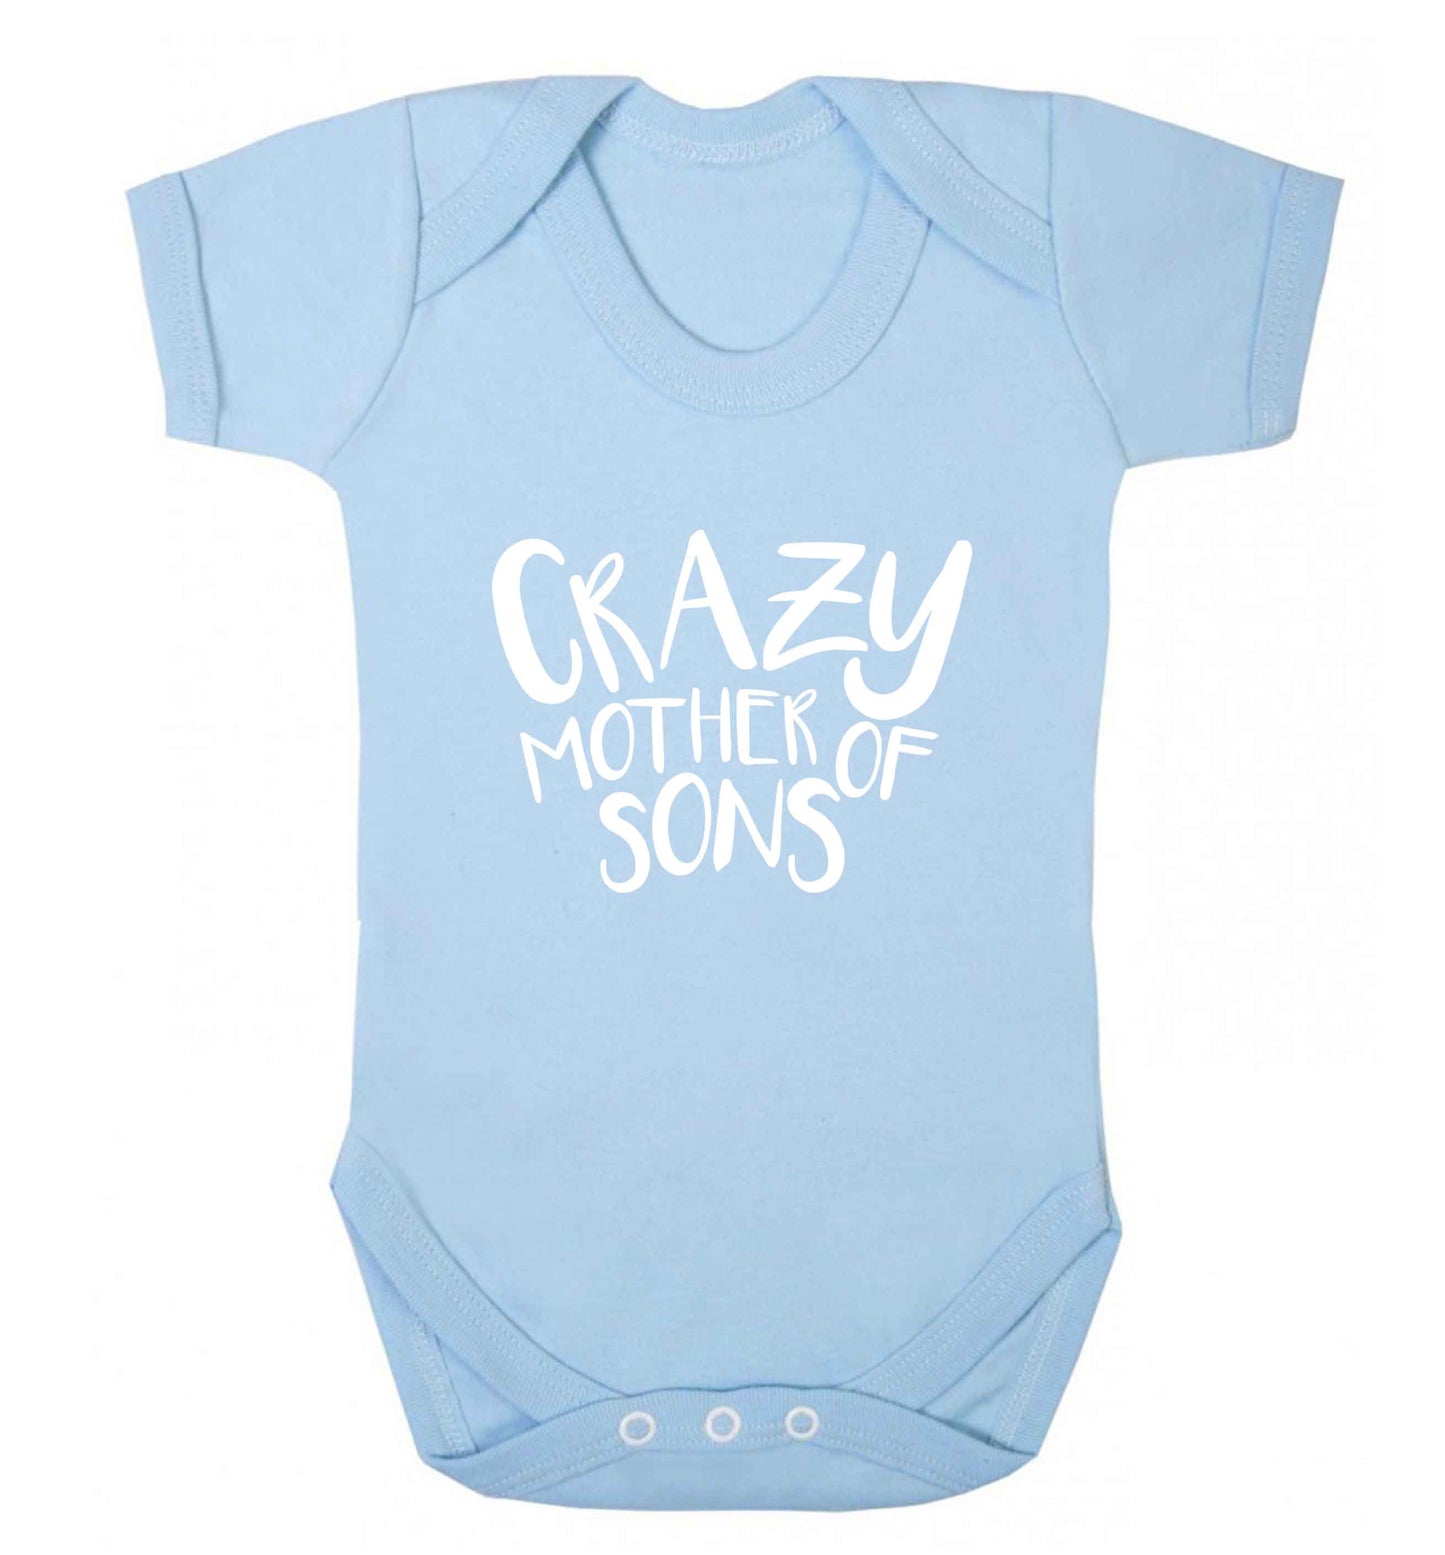 Crazy mother of sons baby vest pale blue 18-24 months